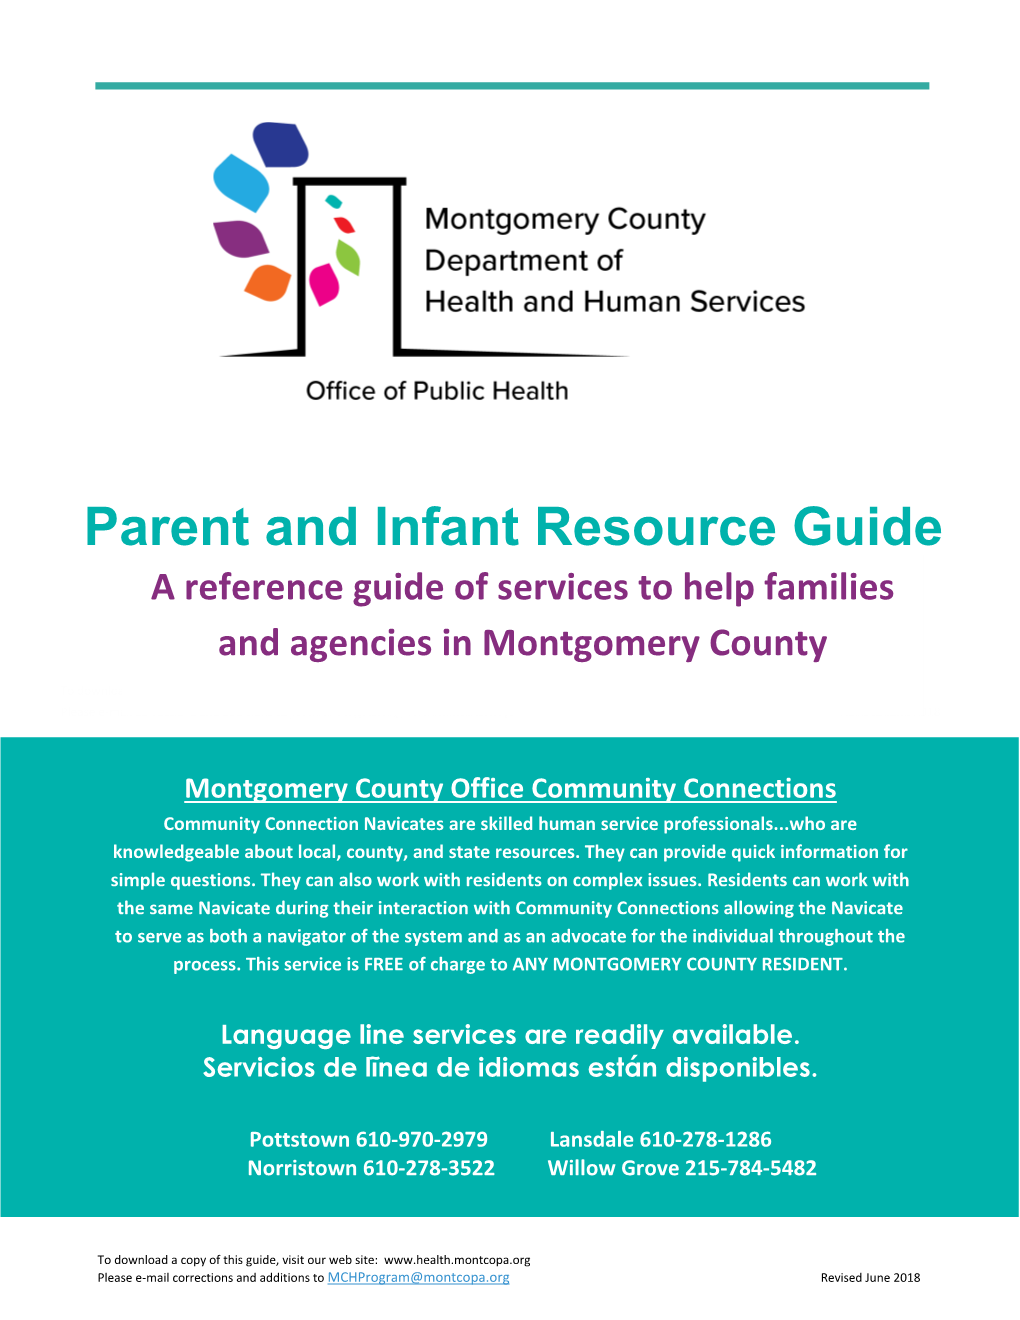 Parent and Infant Resource Guide a Reference Guide of Services to Help Families and Agencies in Montgomery County